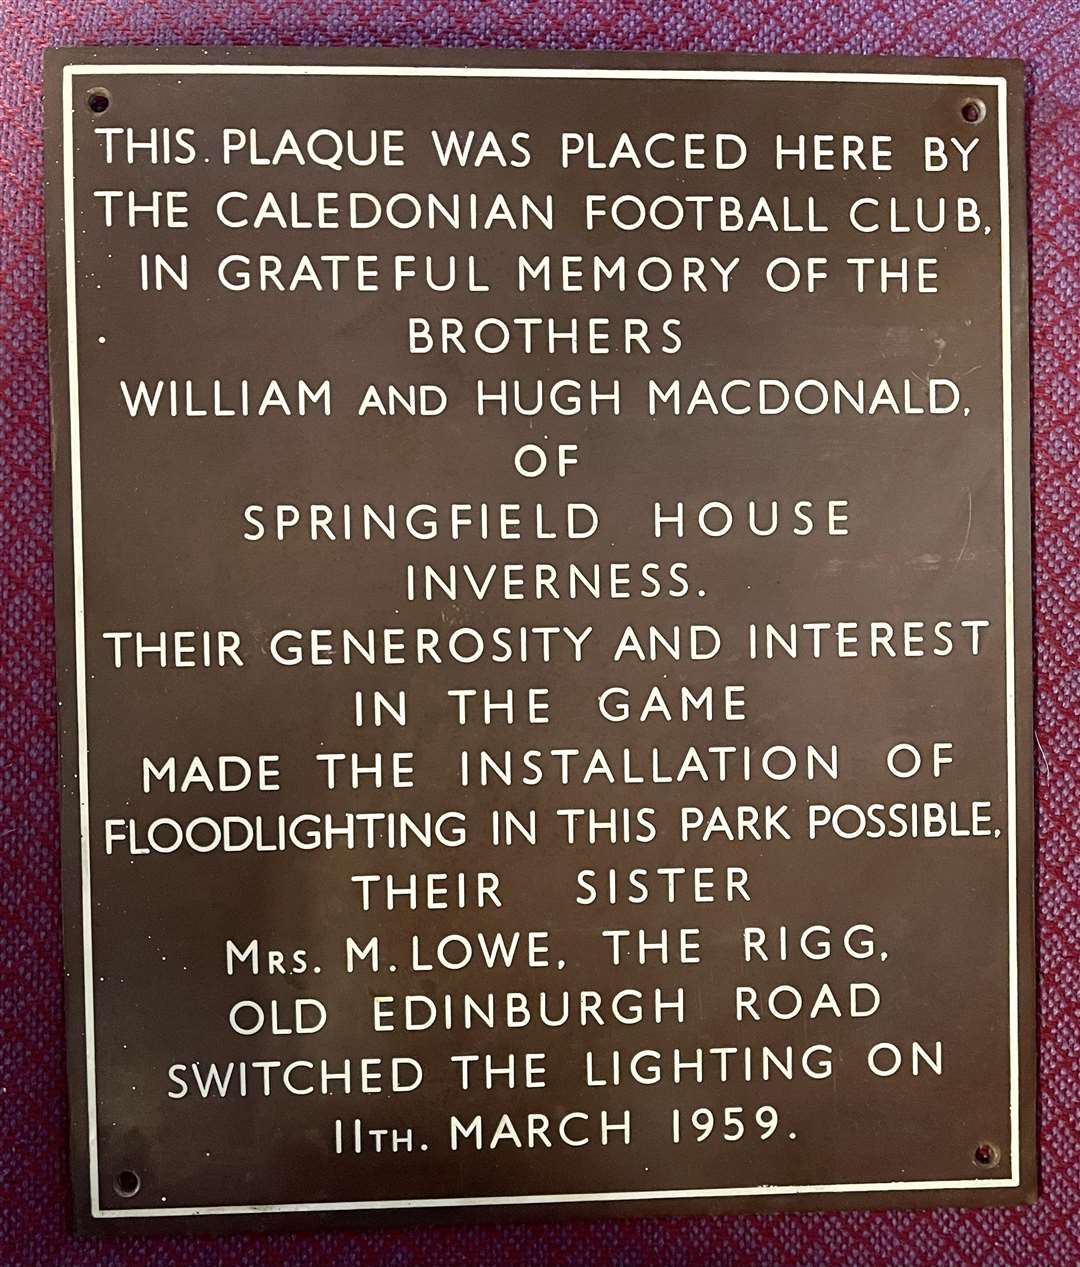 A plaque marked the installation of floodlighting at Caledonian Football Club ground in 1959.